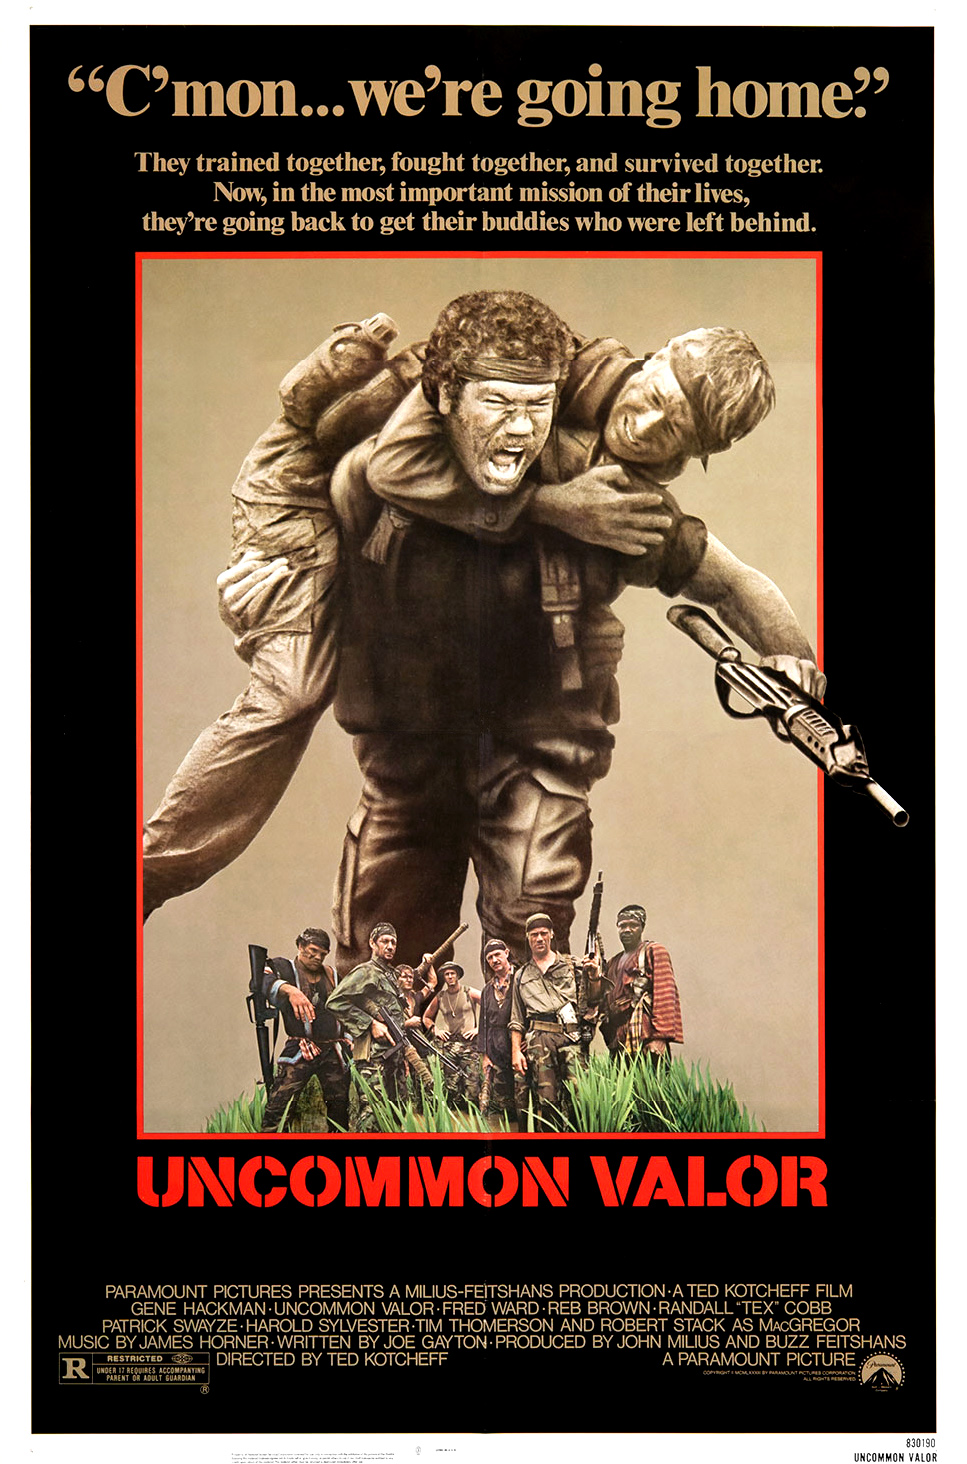 Uncommon Valor by Melvin Claxton